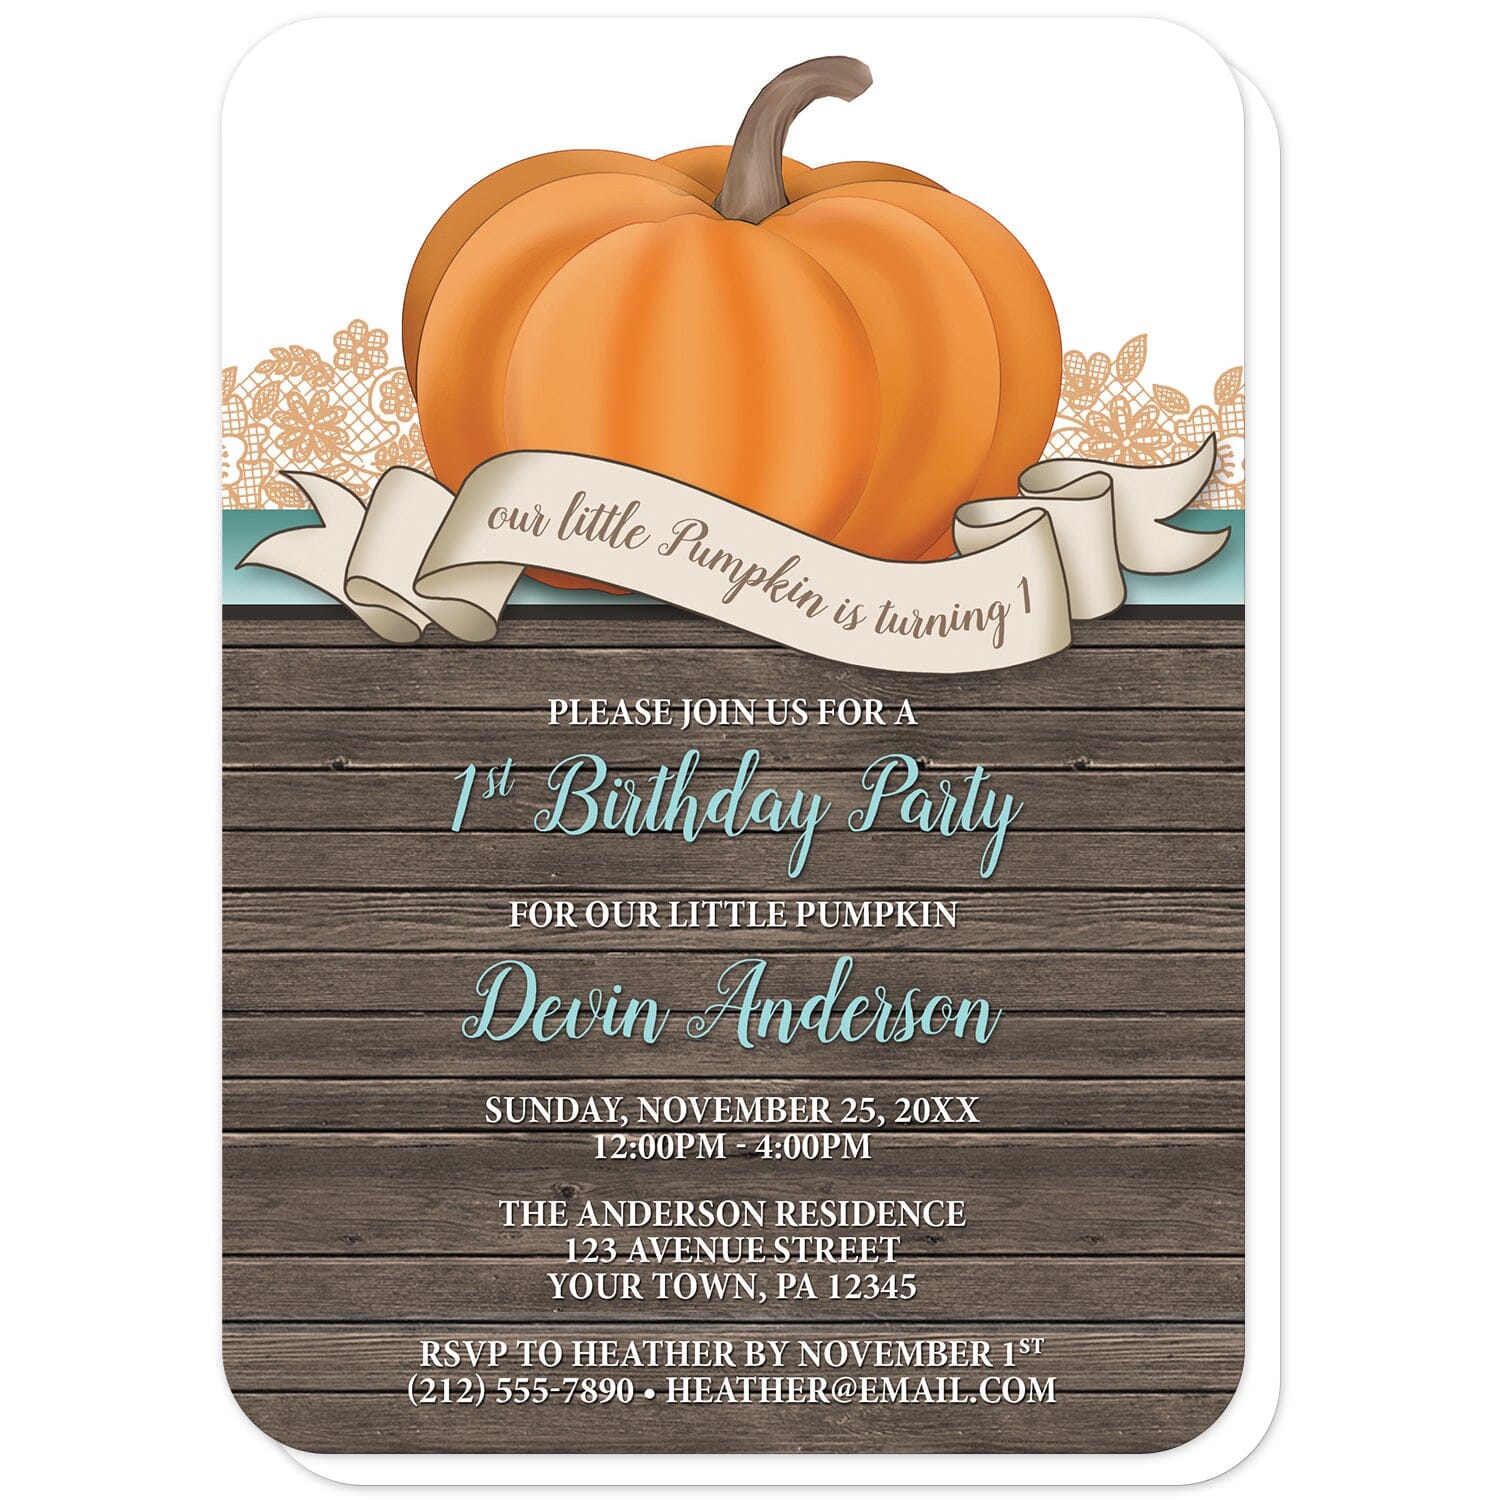 Rustic Orange Teal Pumpkin 1st Birthday Invitations (with rounded corners) at Artistically Invited. Rustic orange teal pumpkin 1st birthday invitations with an illustration of an orange pumpkin over wood and ribbon banner that reads: "our little pumpkin is turning 1". This cute pumpkin drawing is set on a horizontal teal stripe with orange lace behind it. The personalized party information you provide will be custom printed in teal and white over a country brown wood background below the pumpkin.